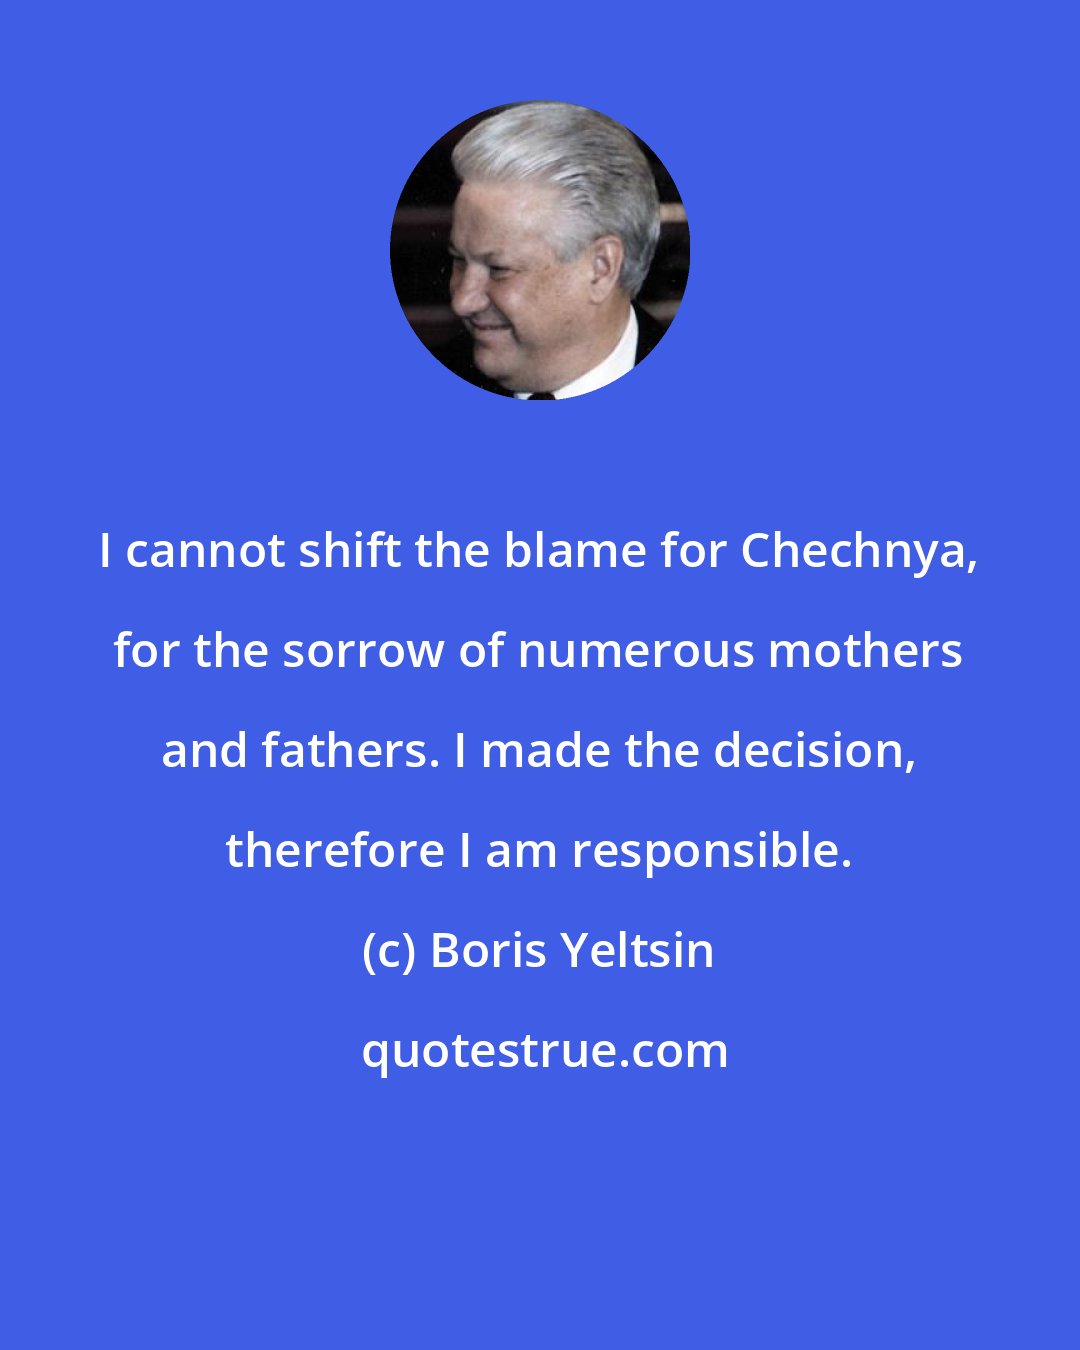 Boris Yeltsin: I cannot shift the blame for Chechnya, for the sorrow of numerous mothers and fathers. I made the decision, therefore I am responsible.